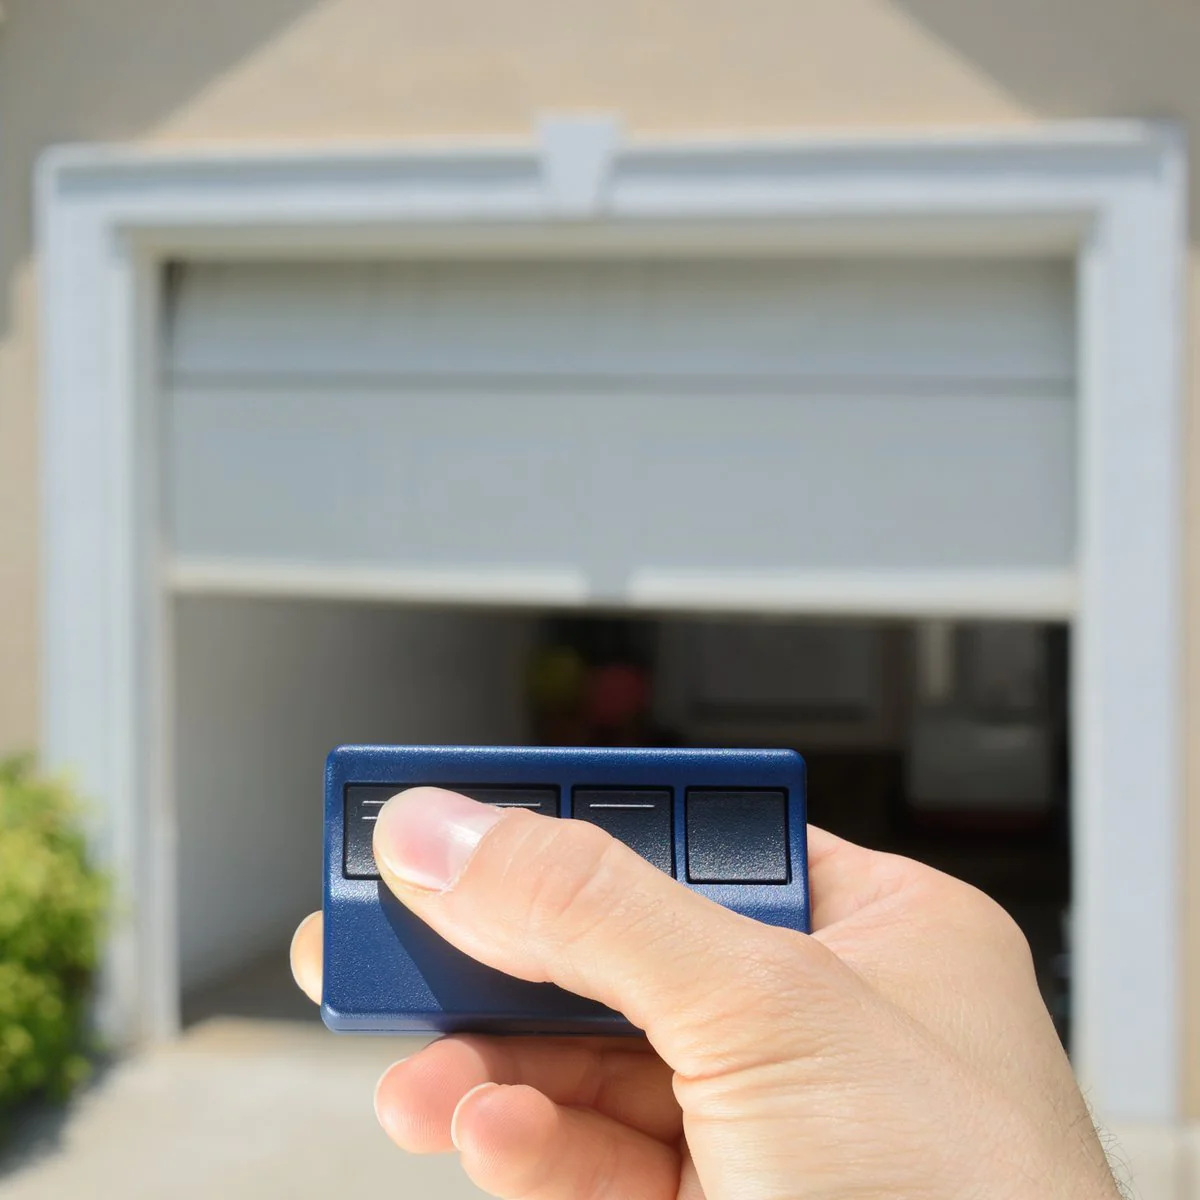 Why Your Chamberlain Garage Door Is Not Closing Properly? Troubleshooting Guide